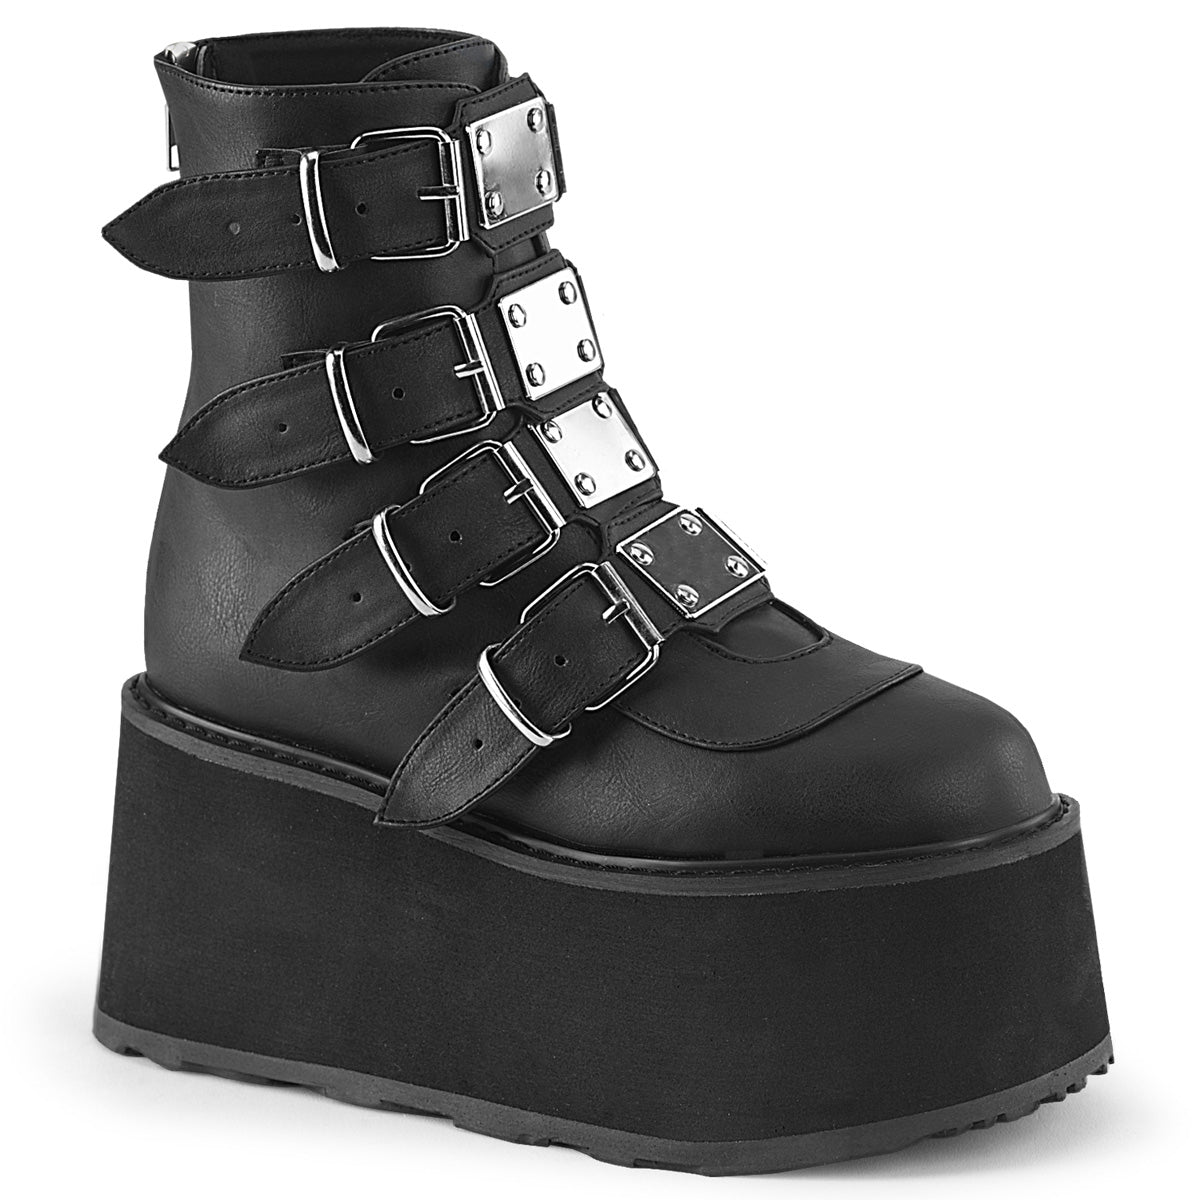 Too Fast | Demonia Damned 105 | Black Vegan Leather Women's Ankle Boots